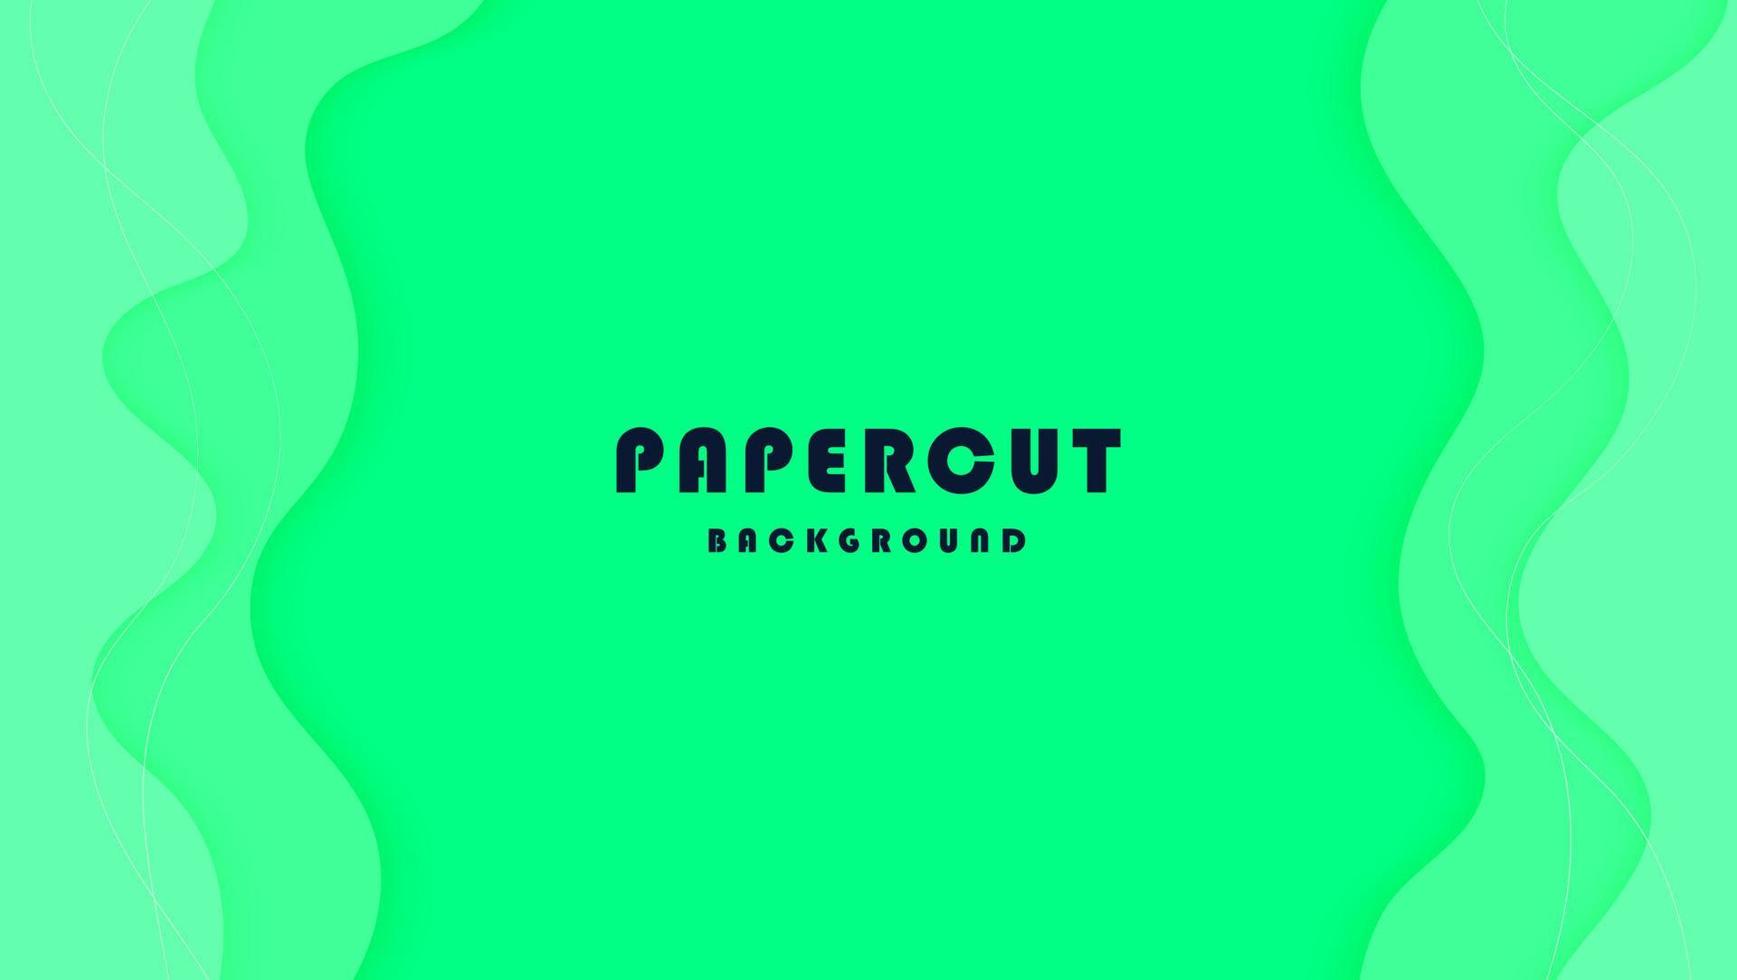 Modern Abstract Light Green Wave Shapes Papercut Style Background Design vector